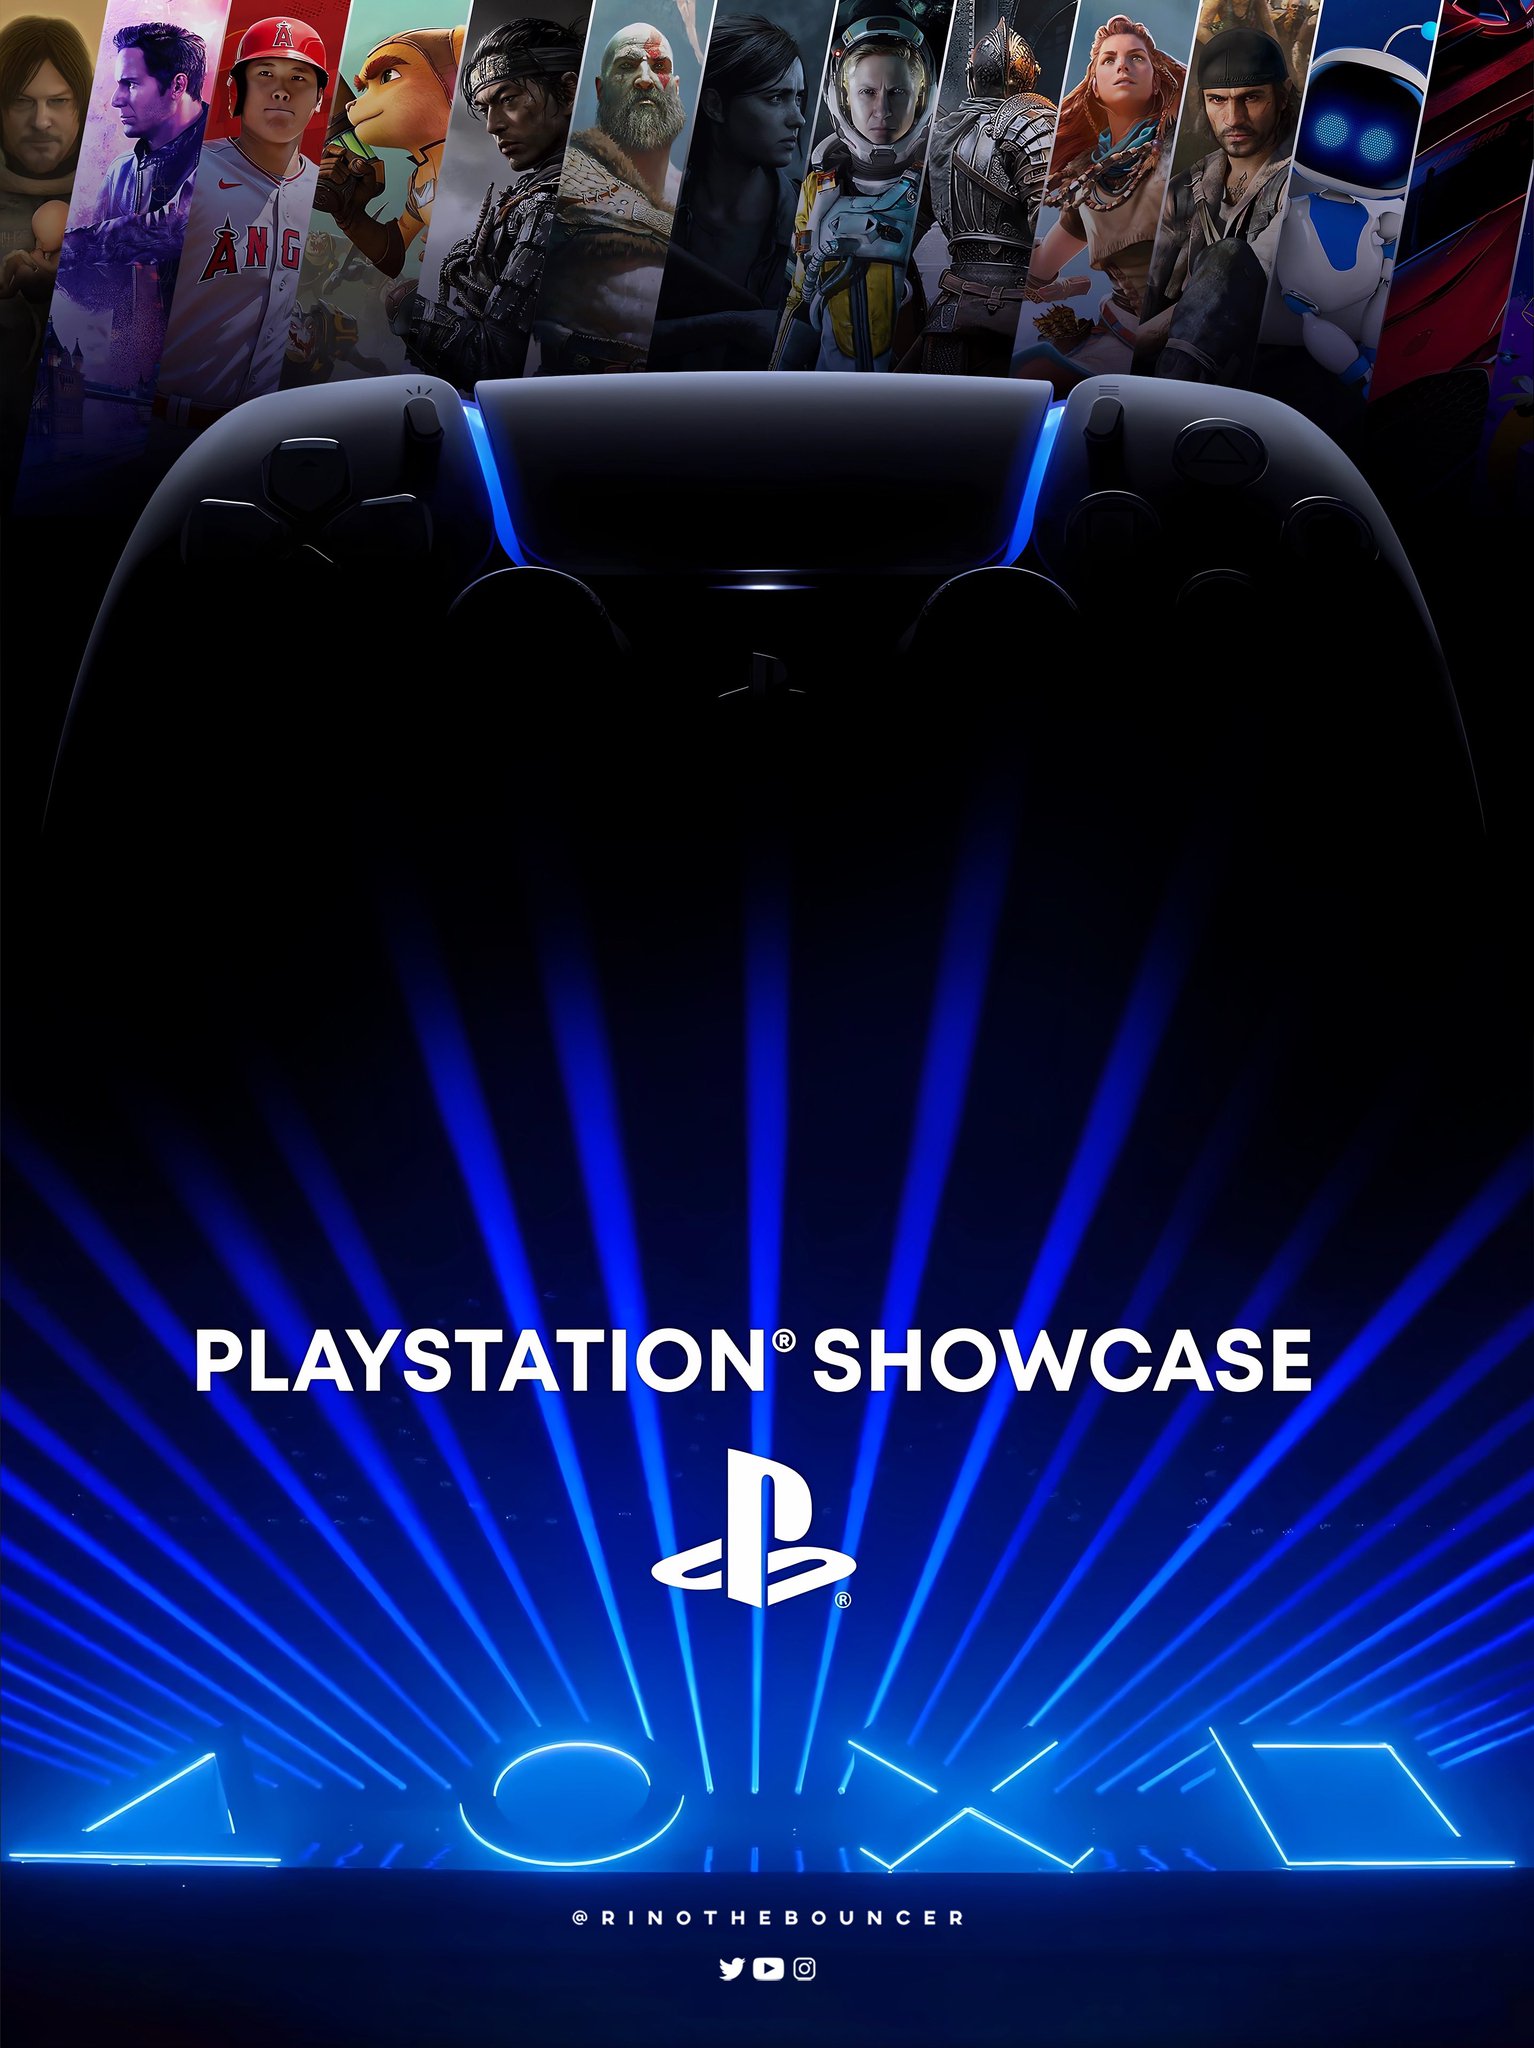 Rino on X: HUGE #PlayStation Showcase has long been rumored to